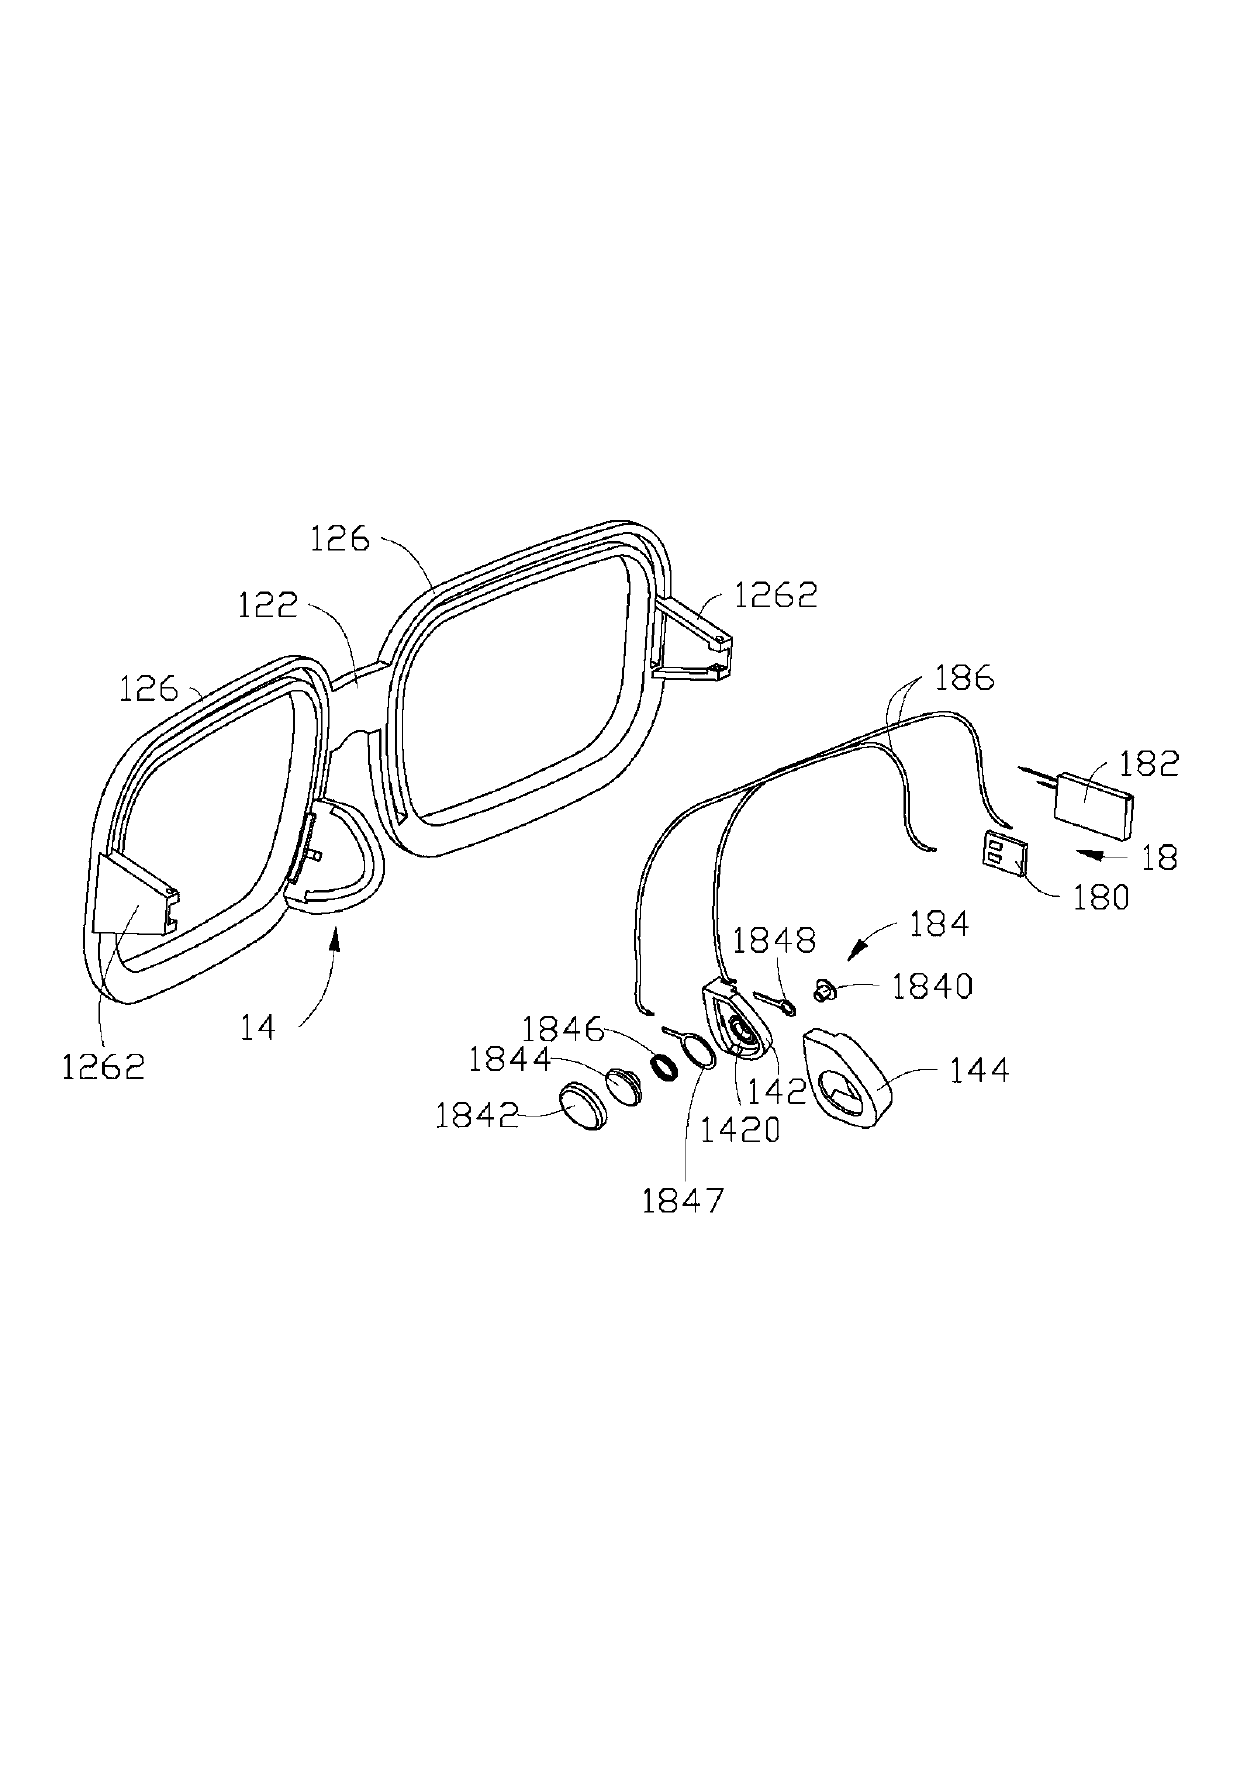 Power-saving structure for three-dimensional (3D) glasses